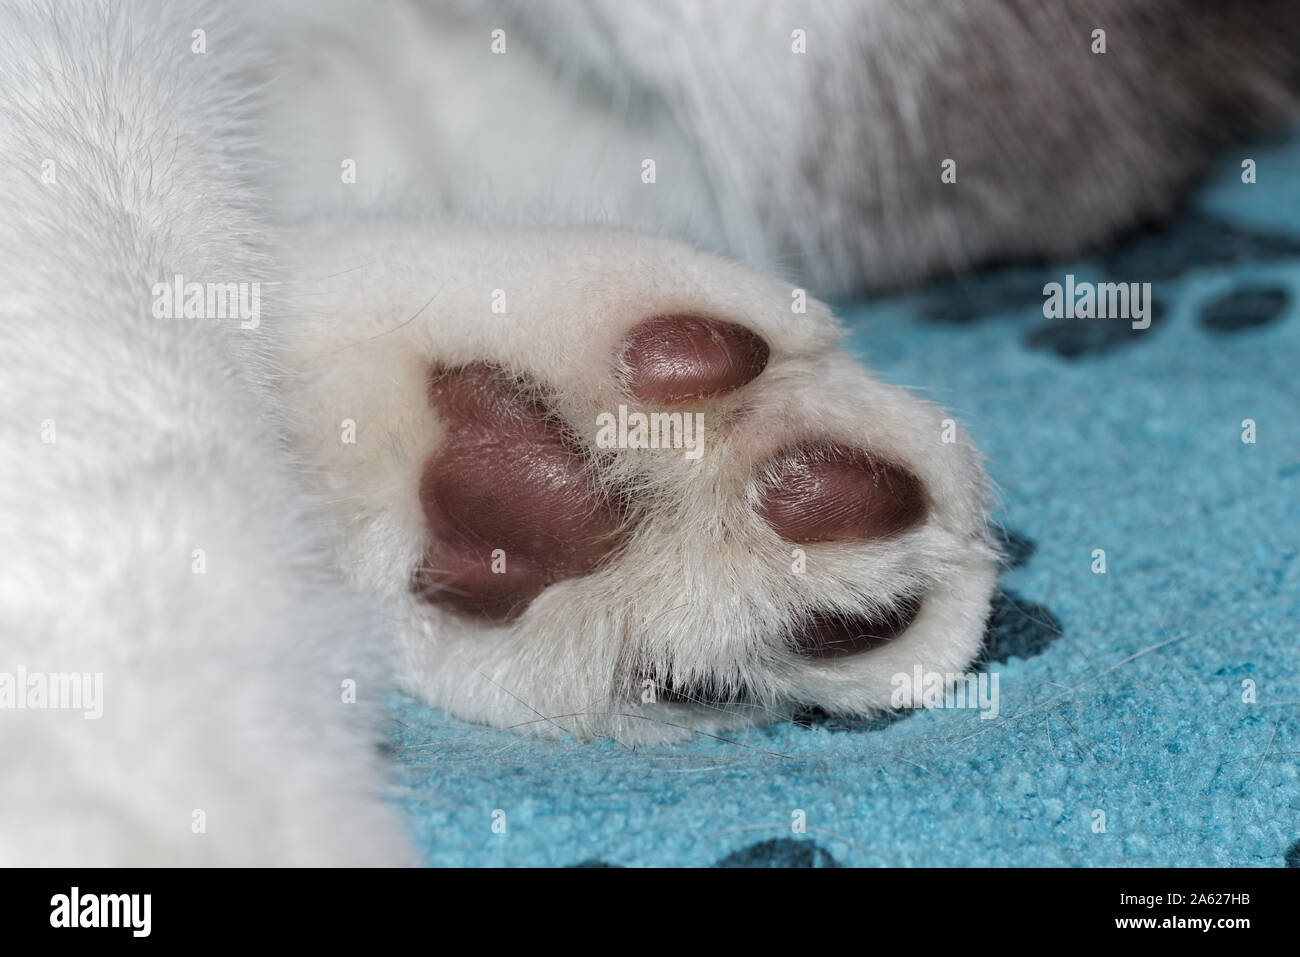 Close-up of a cat's paw with white fur from below Stock Photo